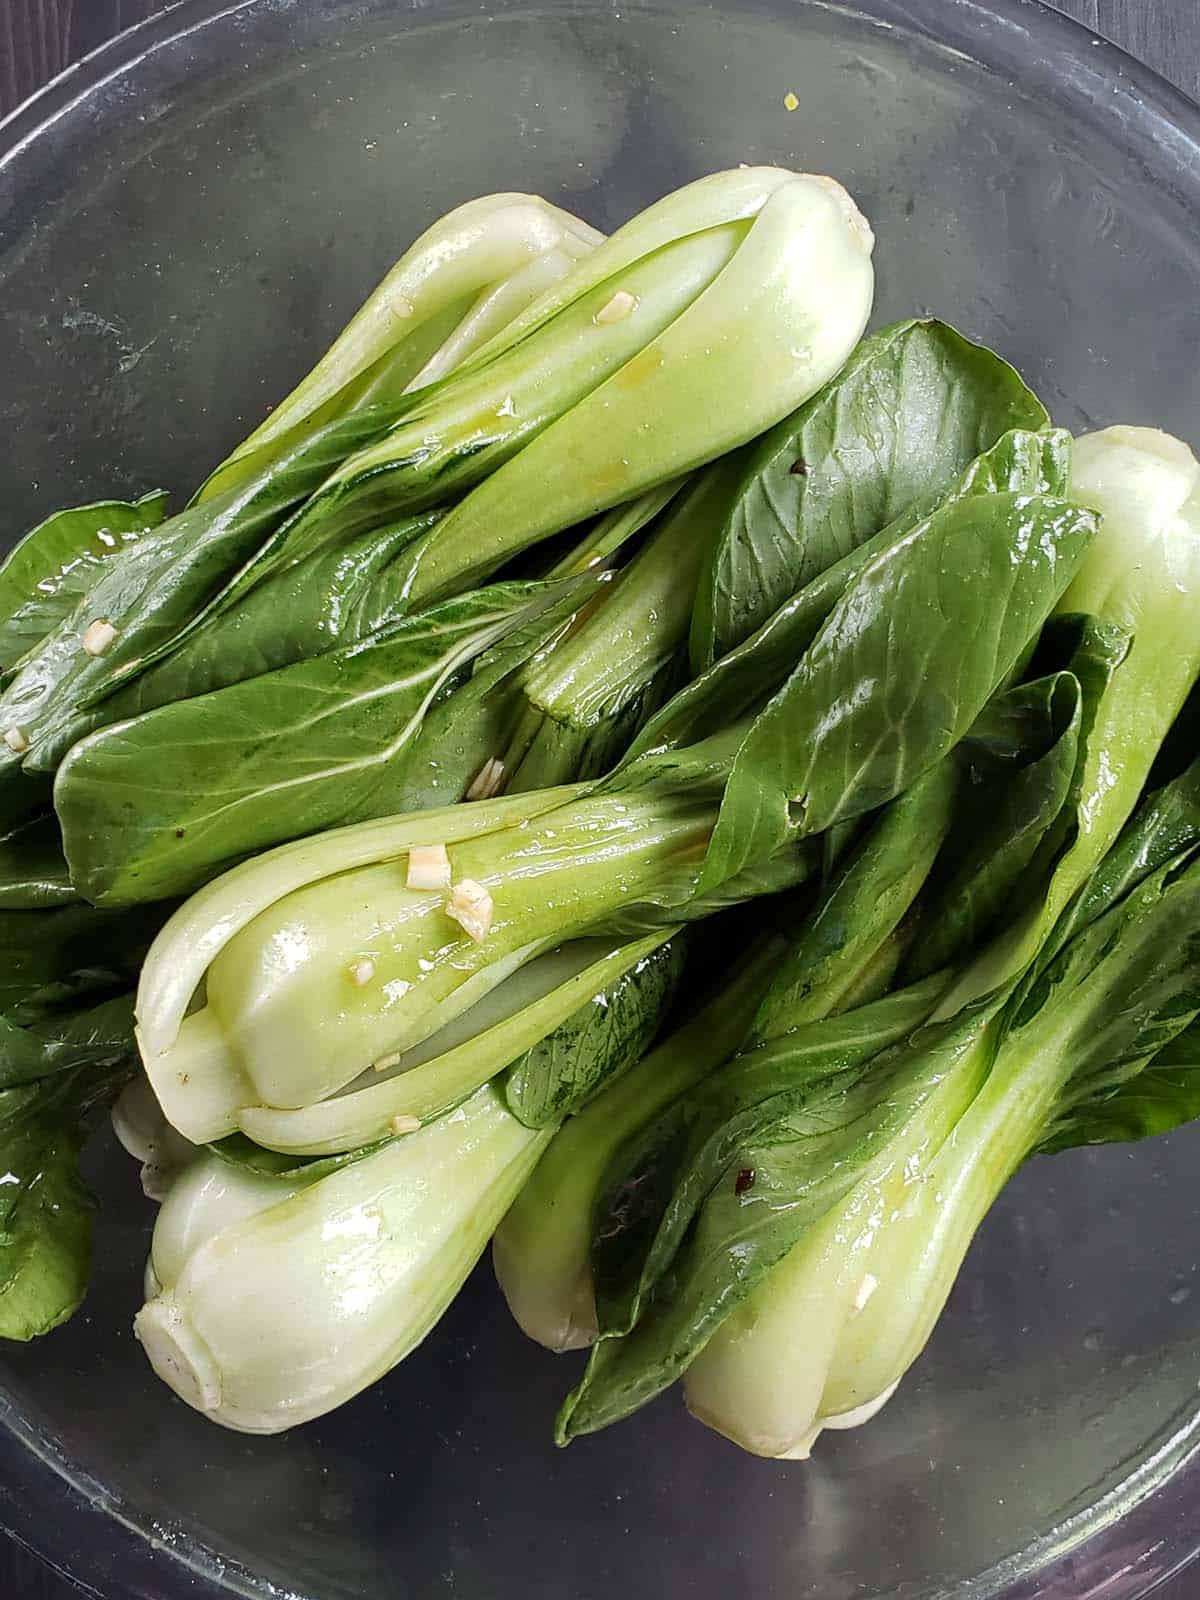 Baby bok choy in a glass bowl.